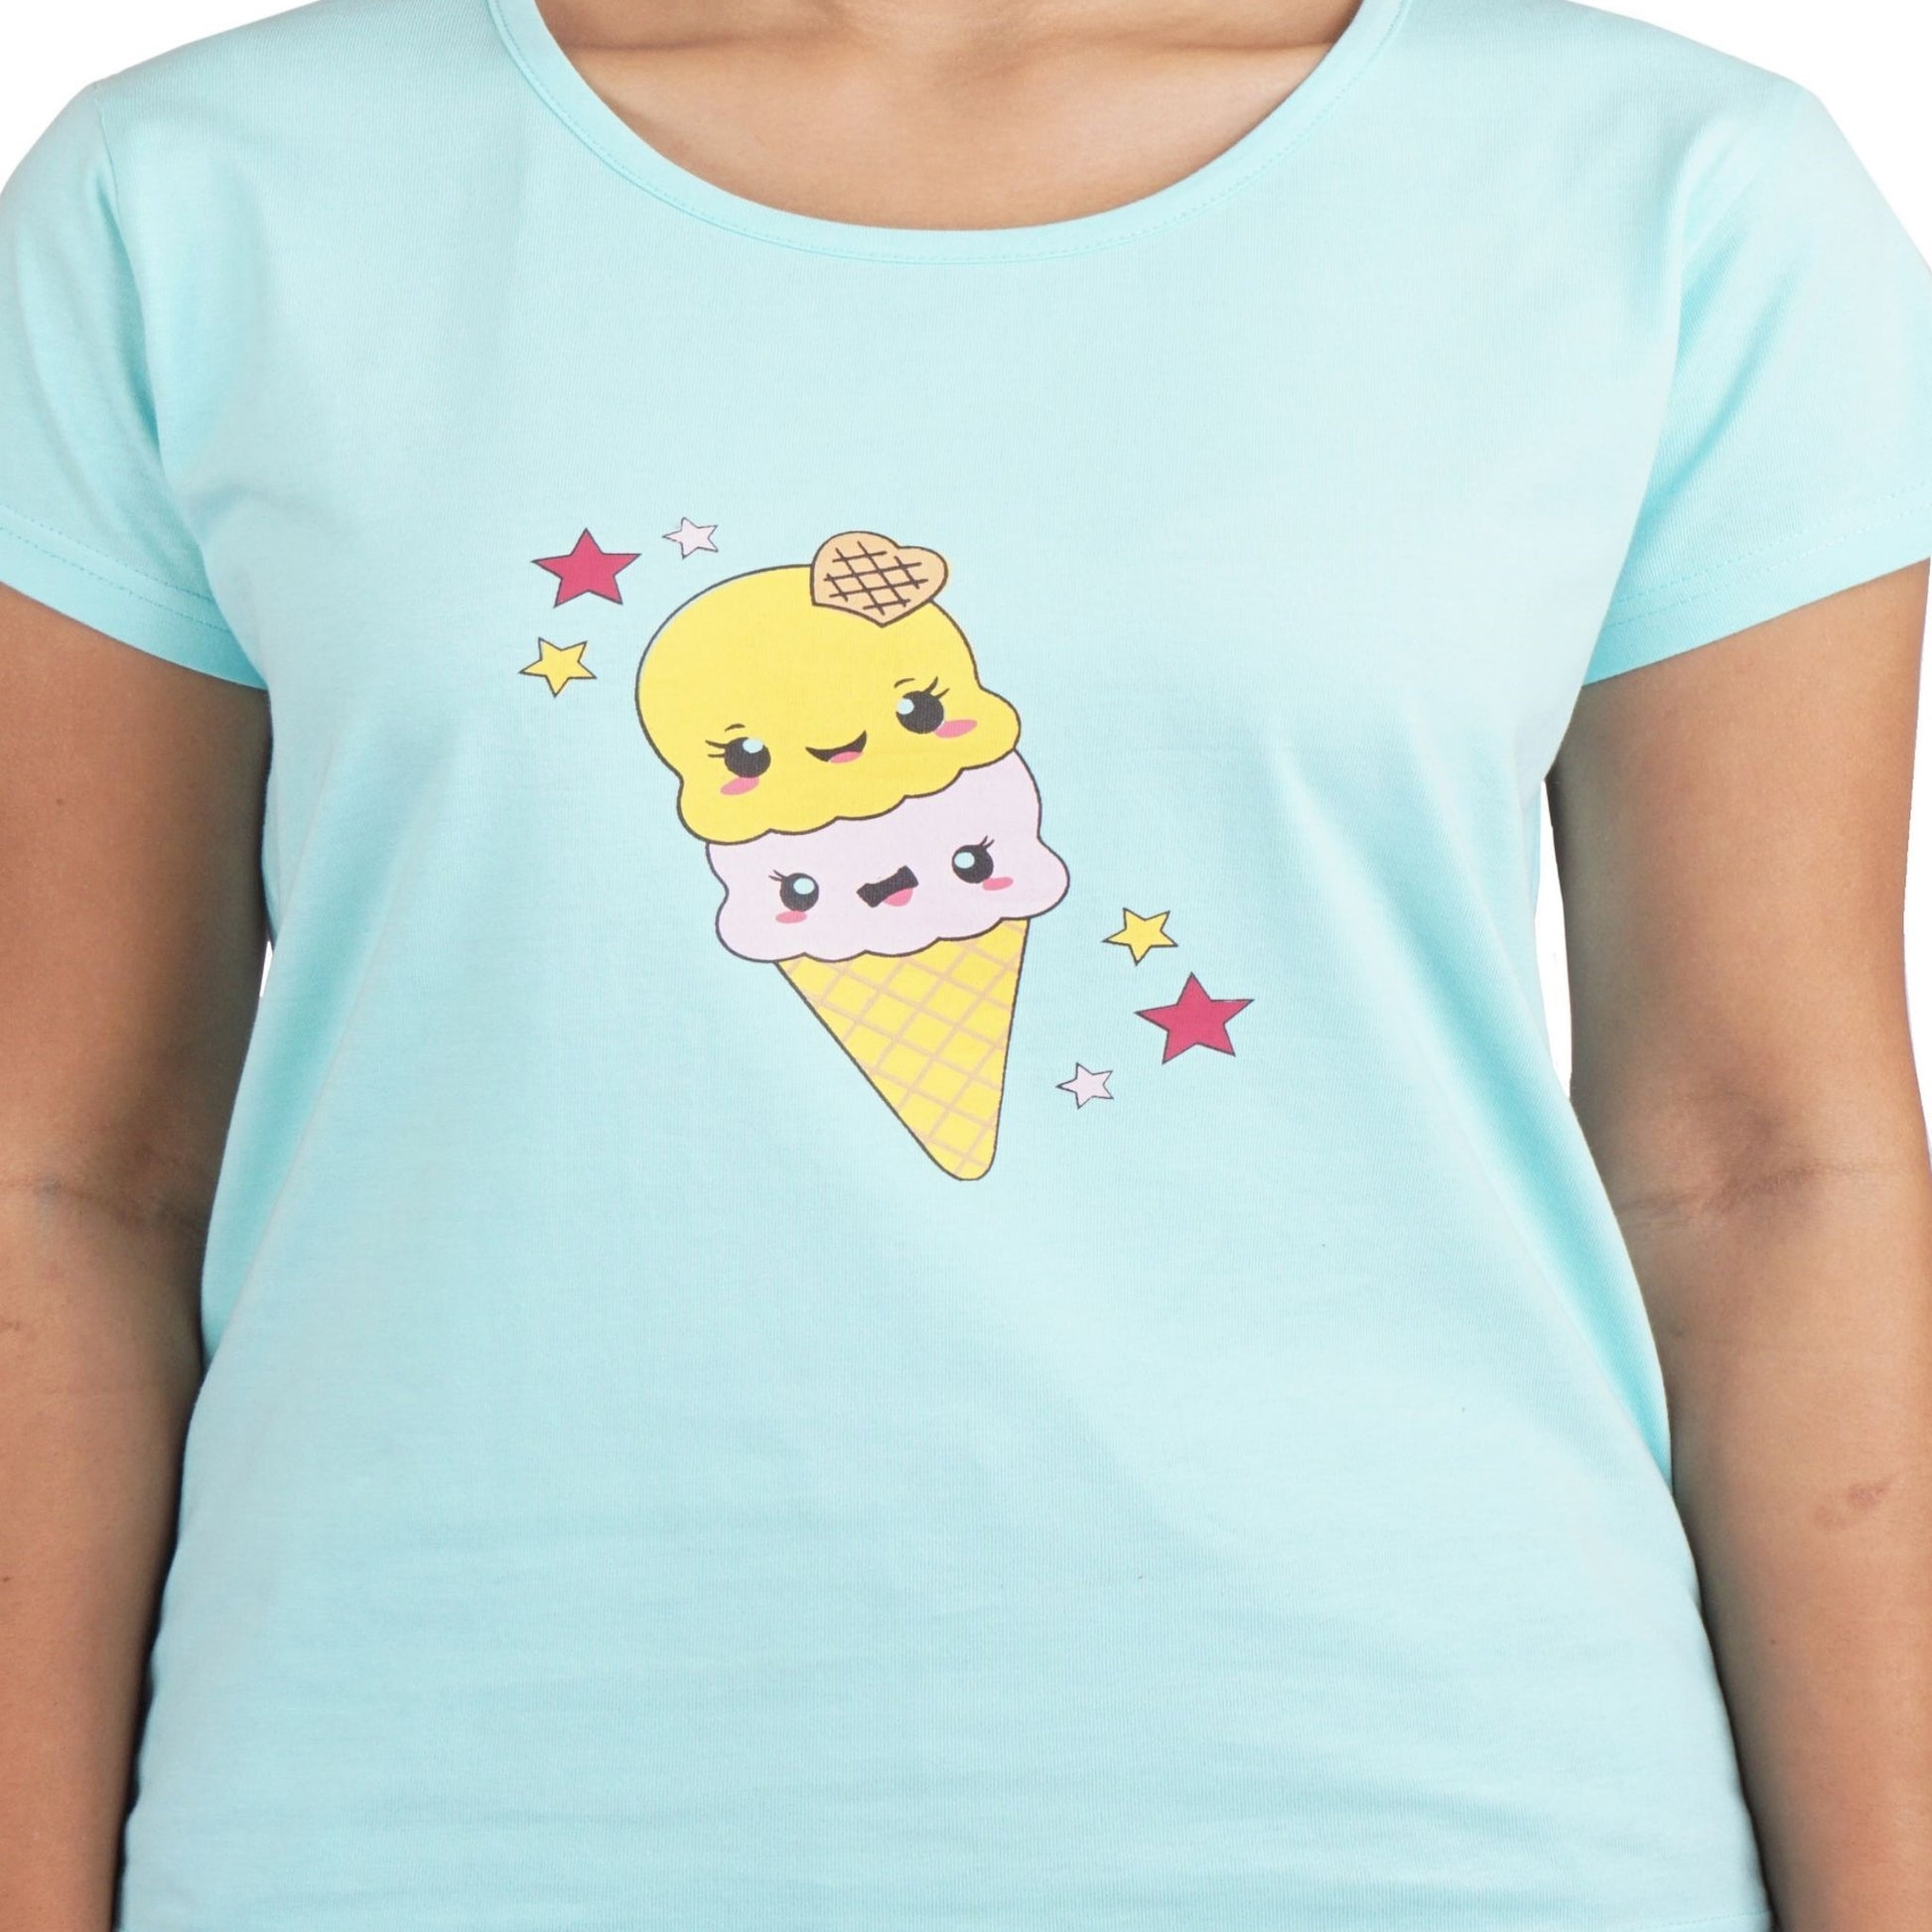 close-up view of t shirt print, ice cream cone in yellow color with eyes design and stars print